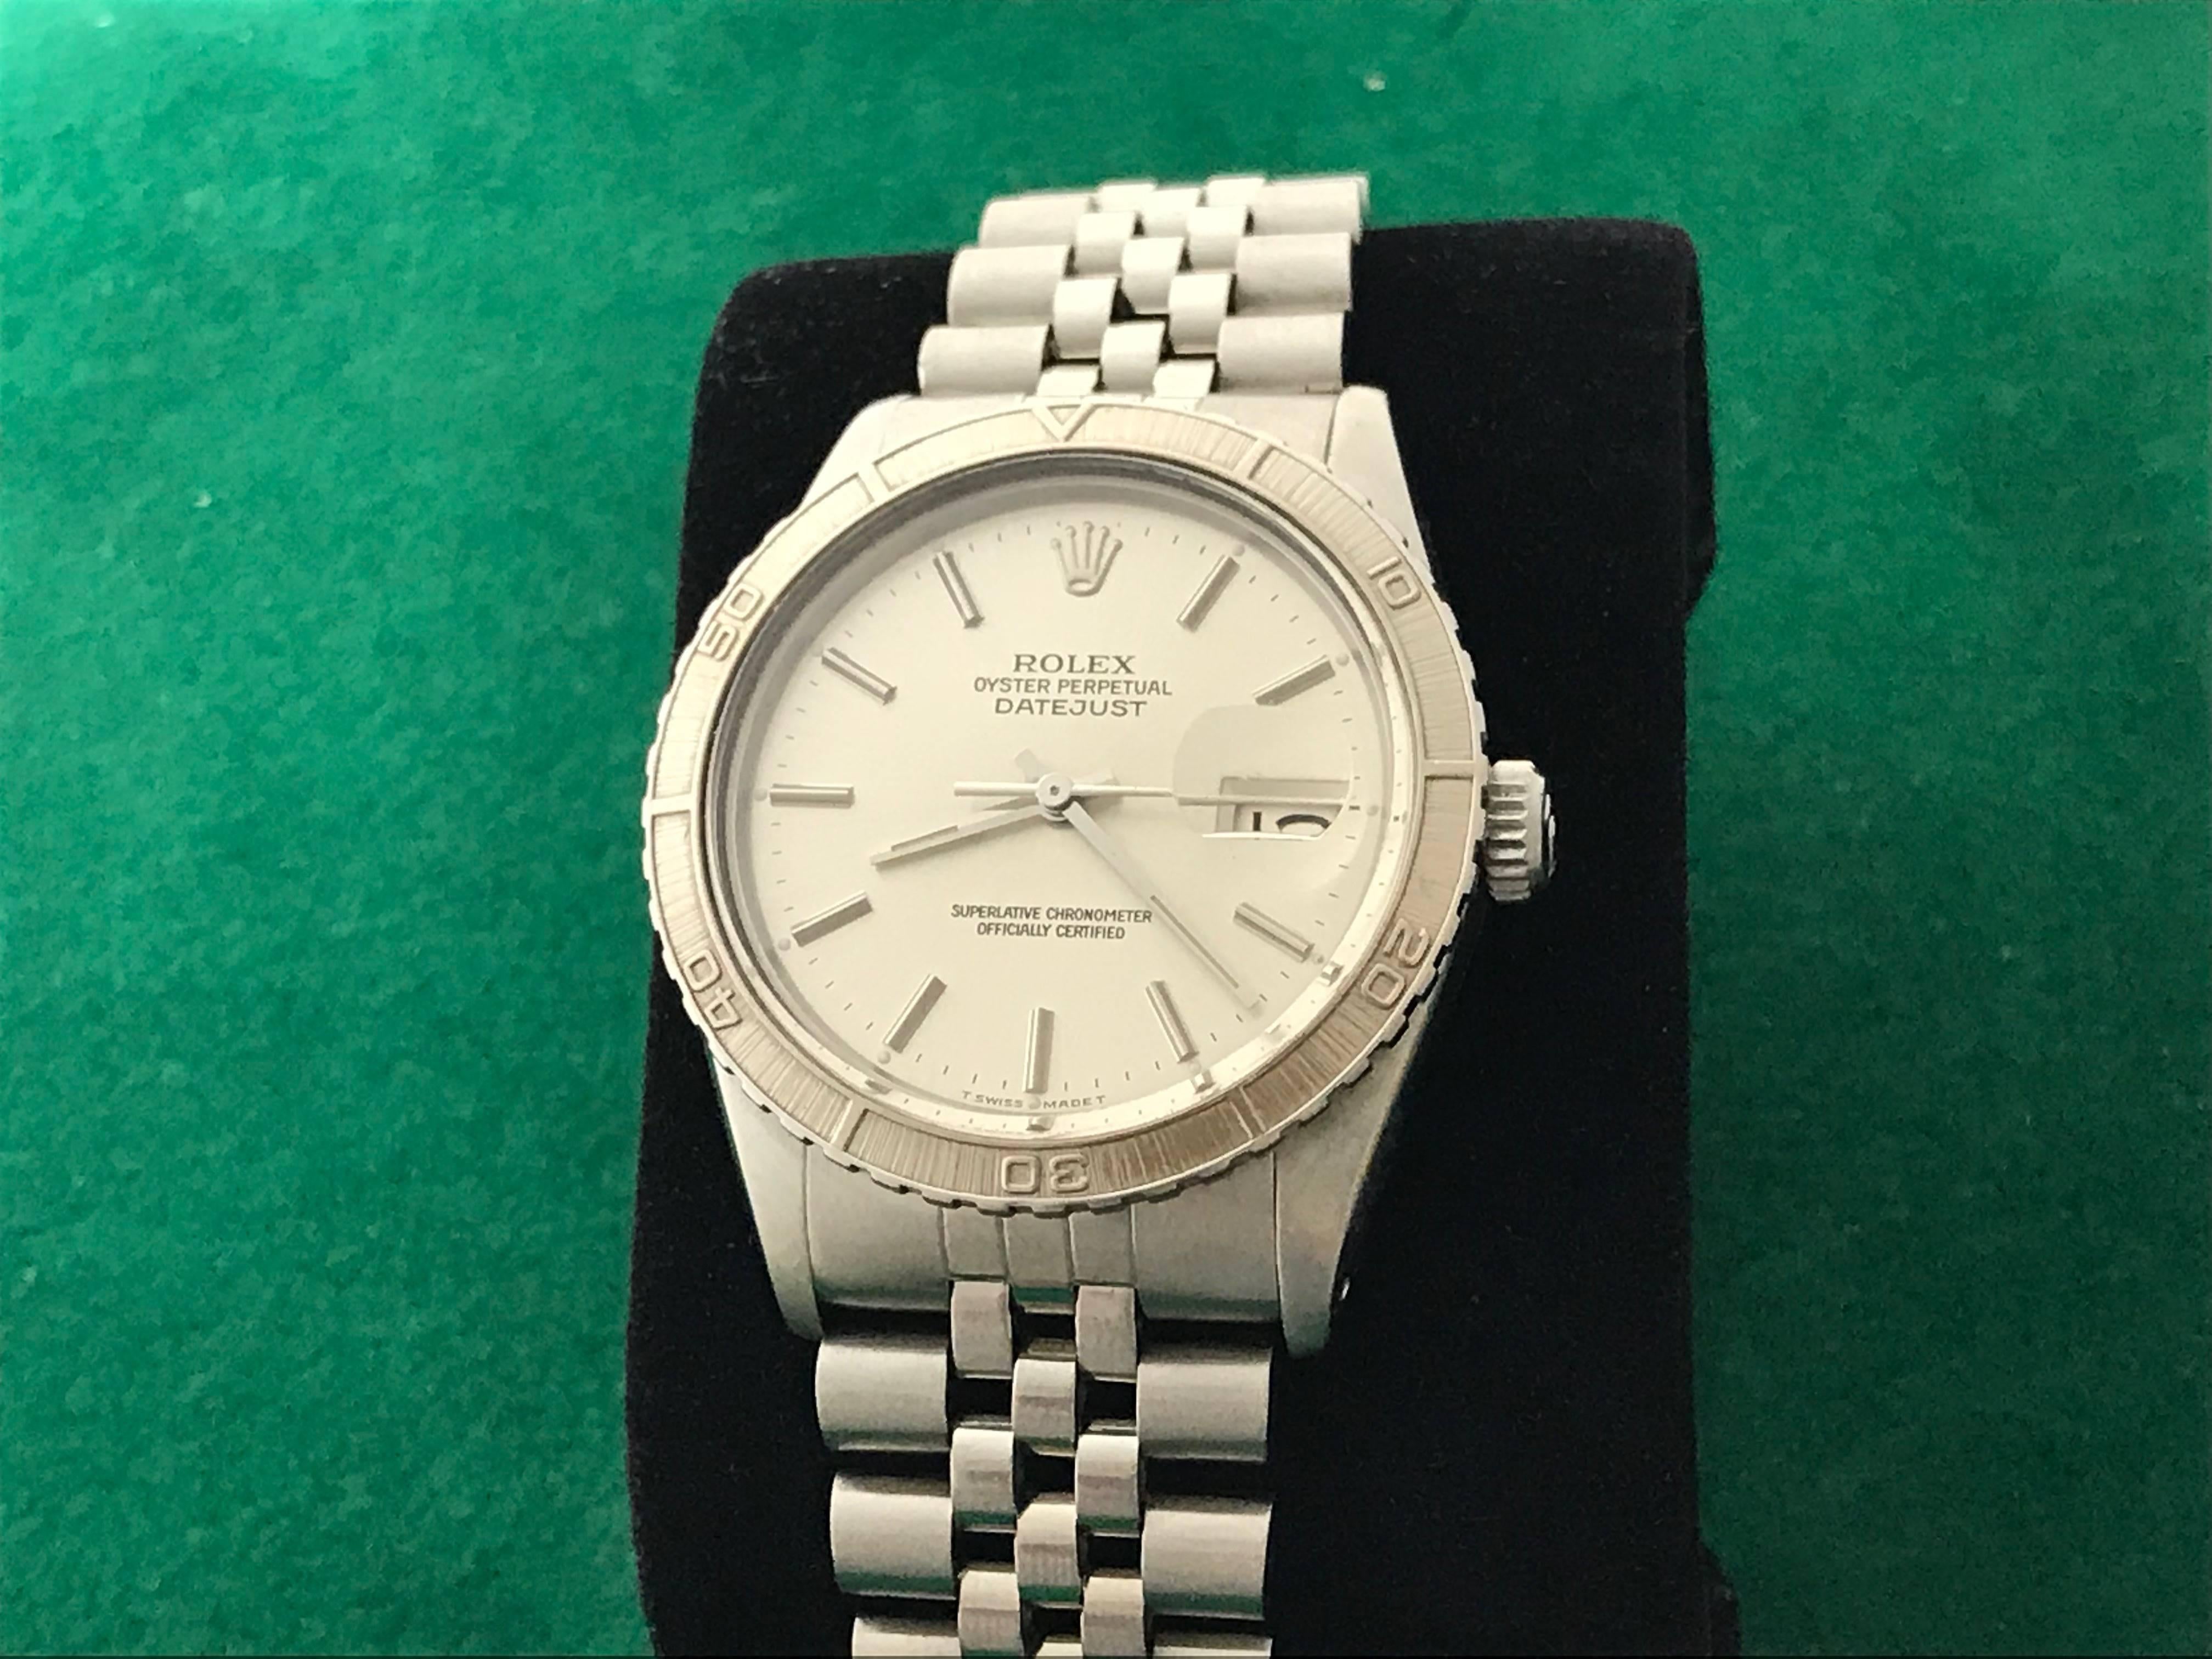 Contemporary Rolex Stainless Steel Datejust Automatic Wristwatch Ref 16250